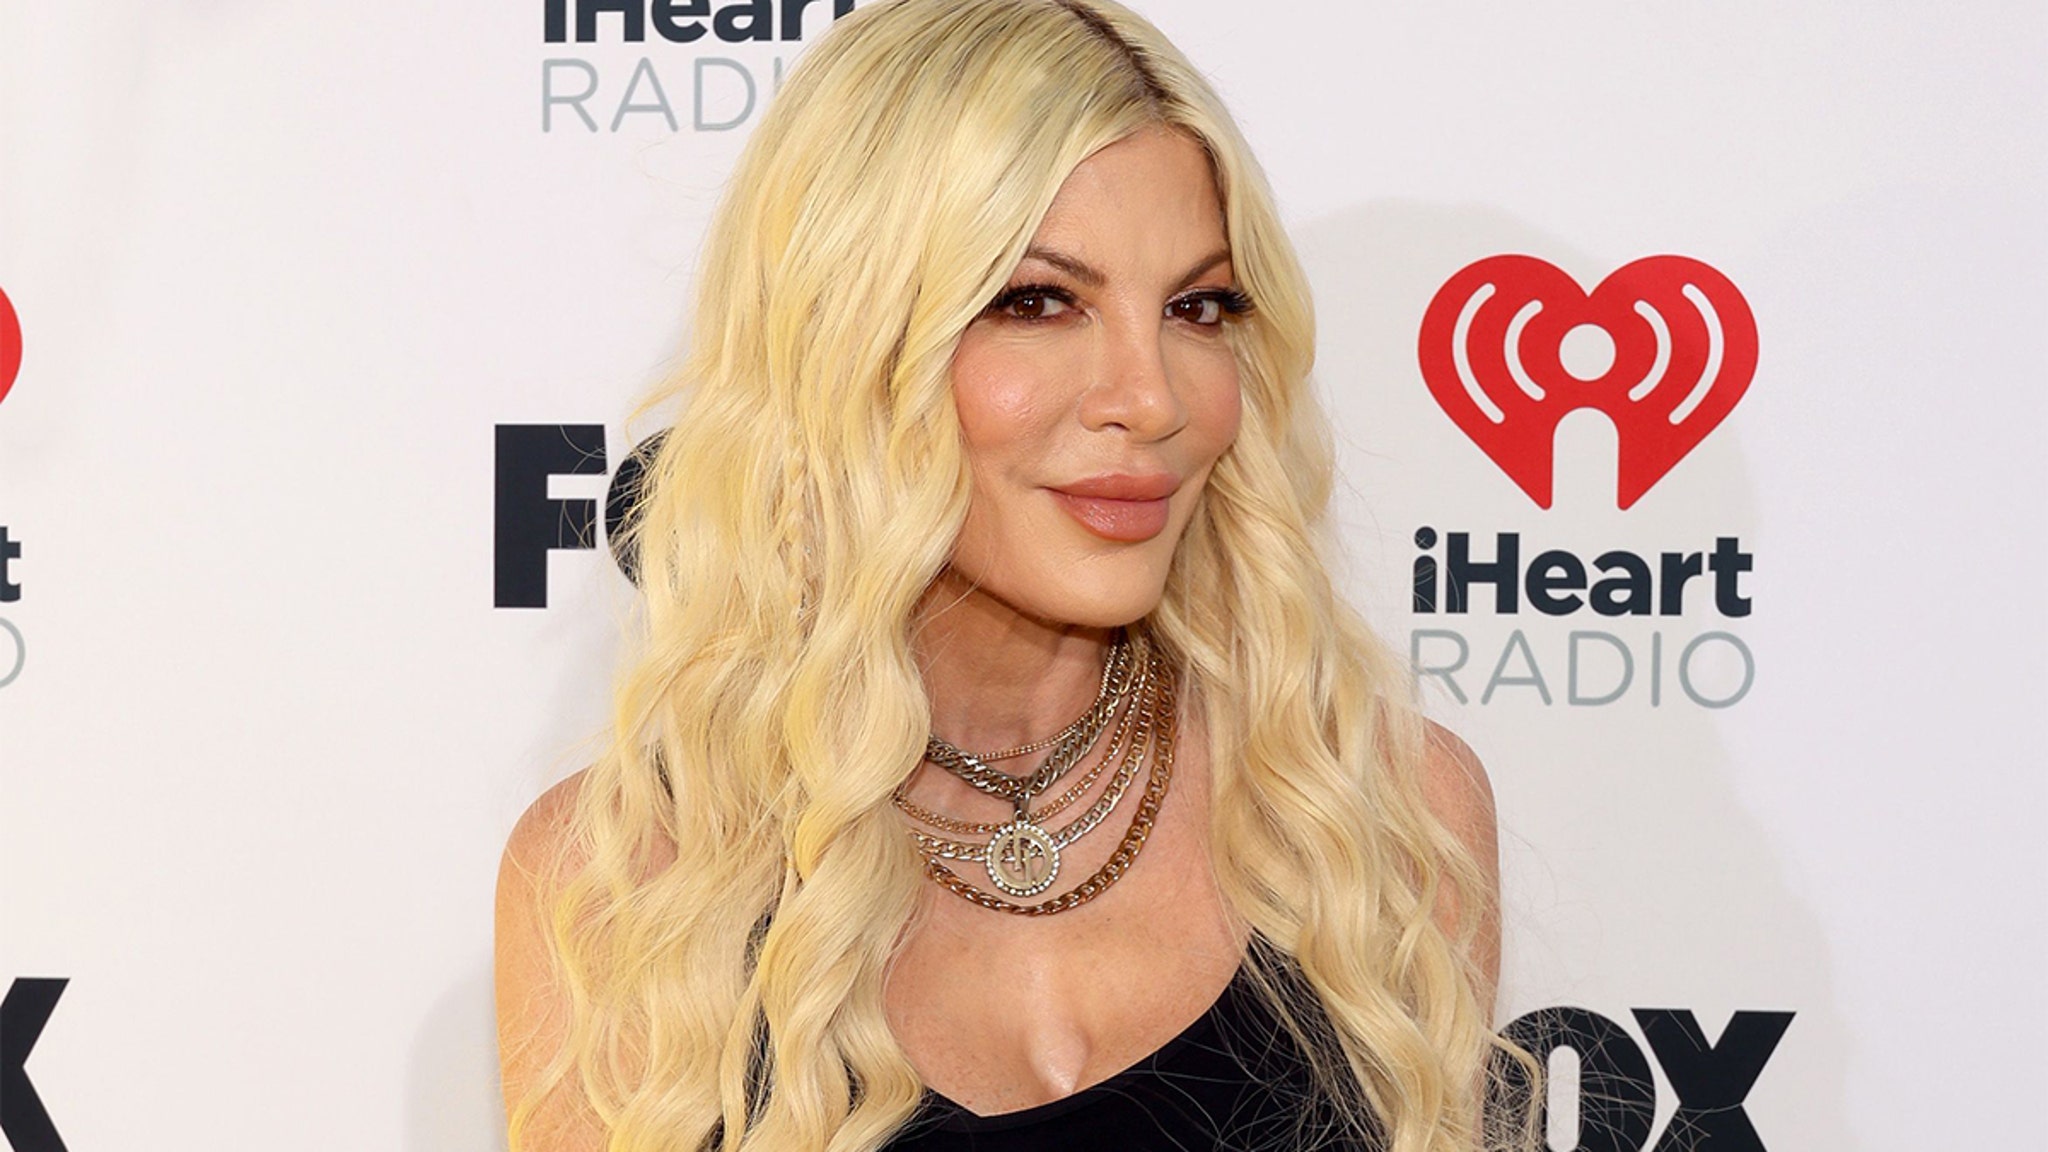 Tori Spelling Reveals She Fainted Three Days Ago Leading to Six Stitches, Possible Concussion